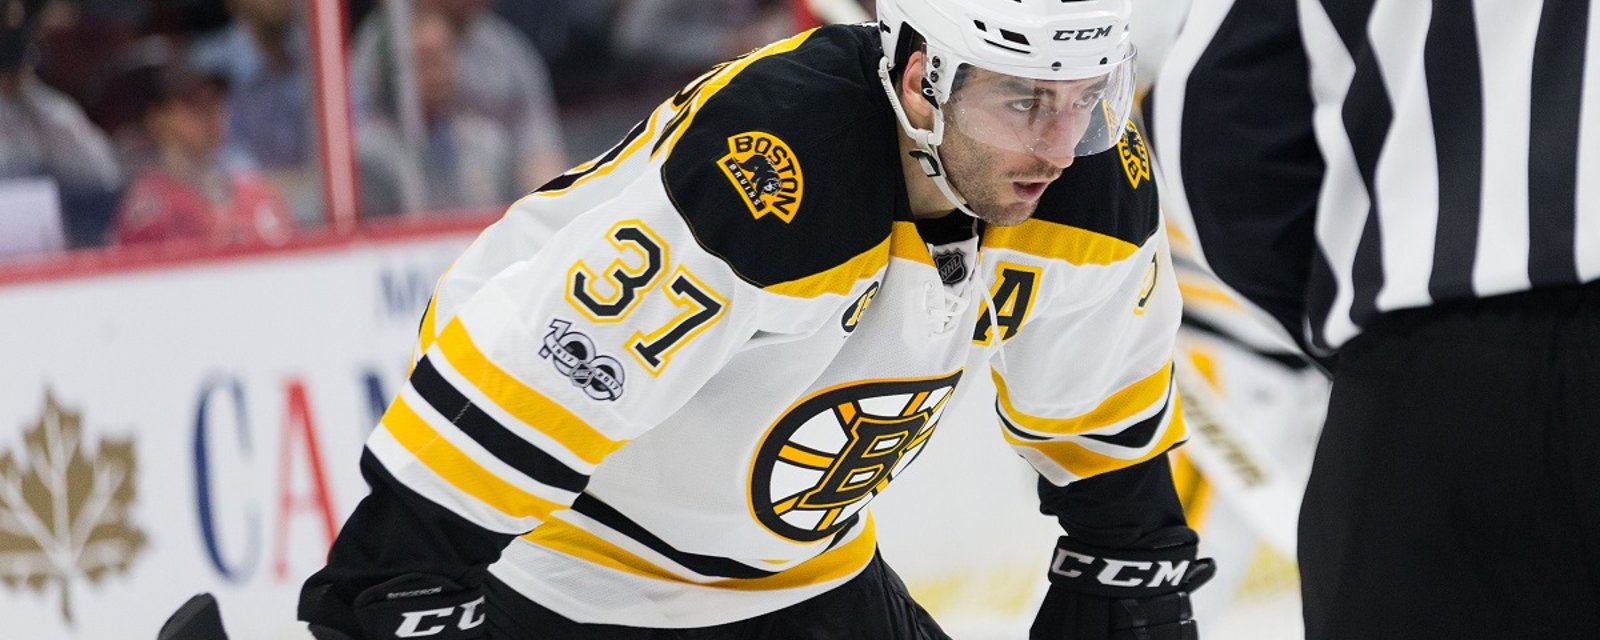 Breaking: More bad news for Patrice Bergeron.